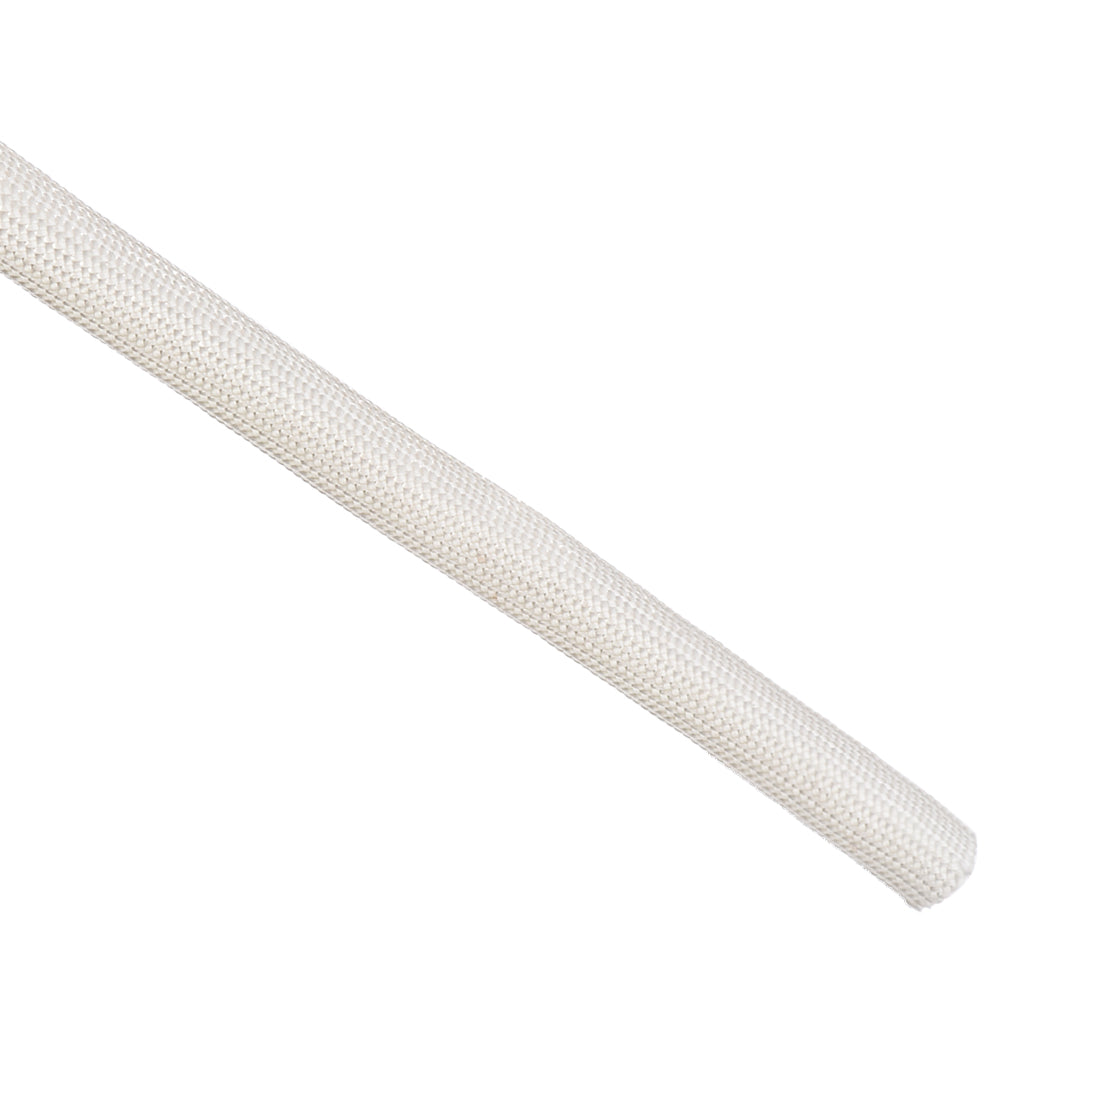 uxcell Uxcell Insulation Cable Protector, 9.8Ft-8mm High TEMP Fiberglass Sleeve White